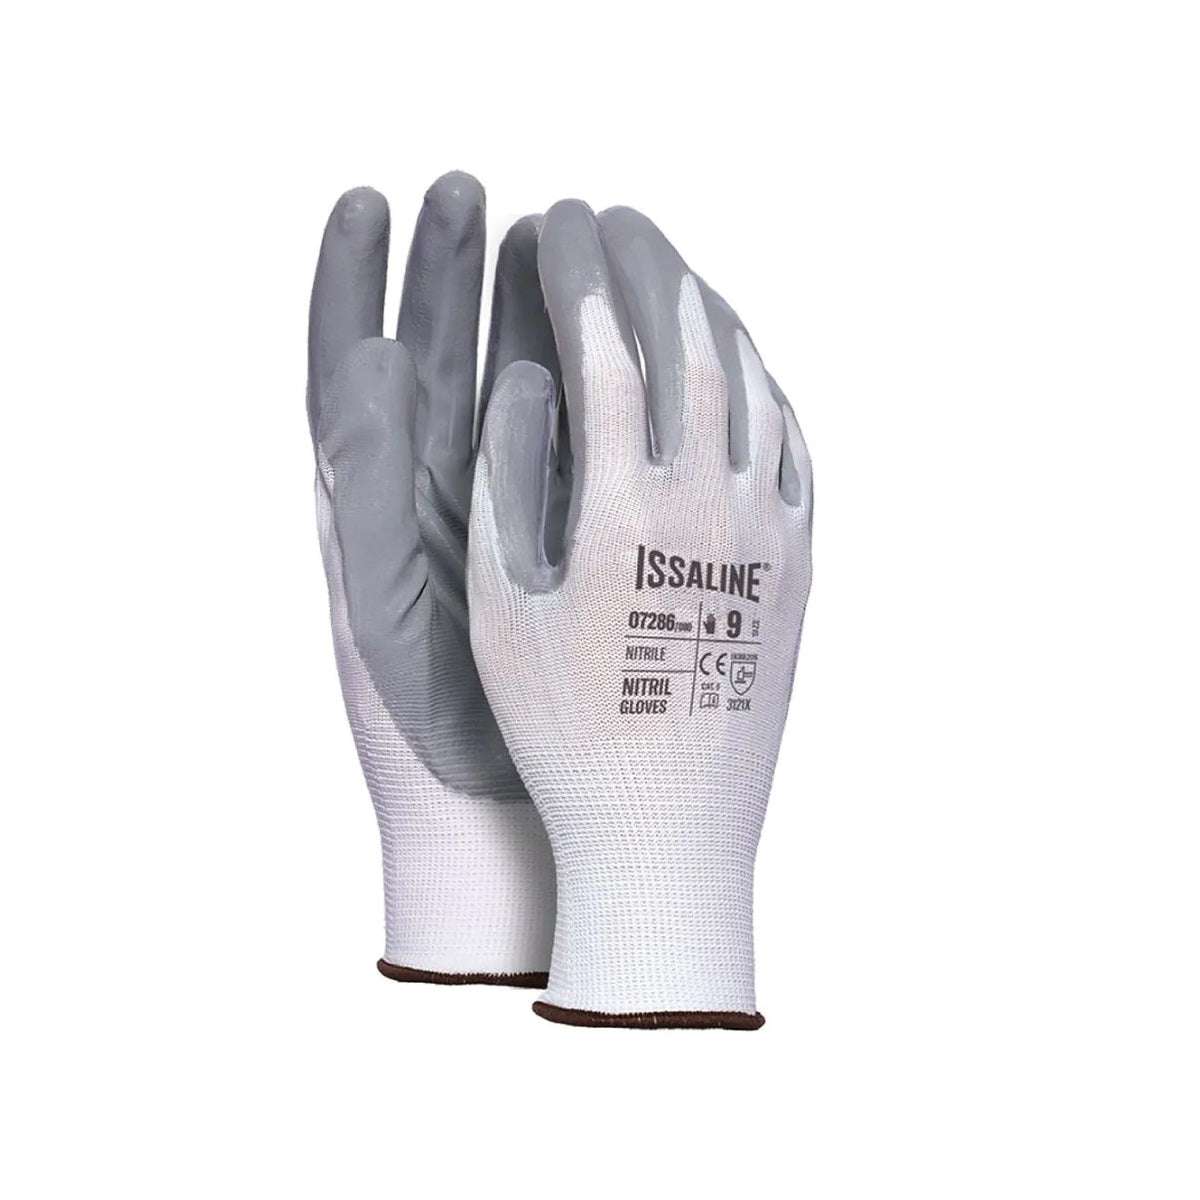 Nitrile coated polyester glove size 8 - Industrial starter